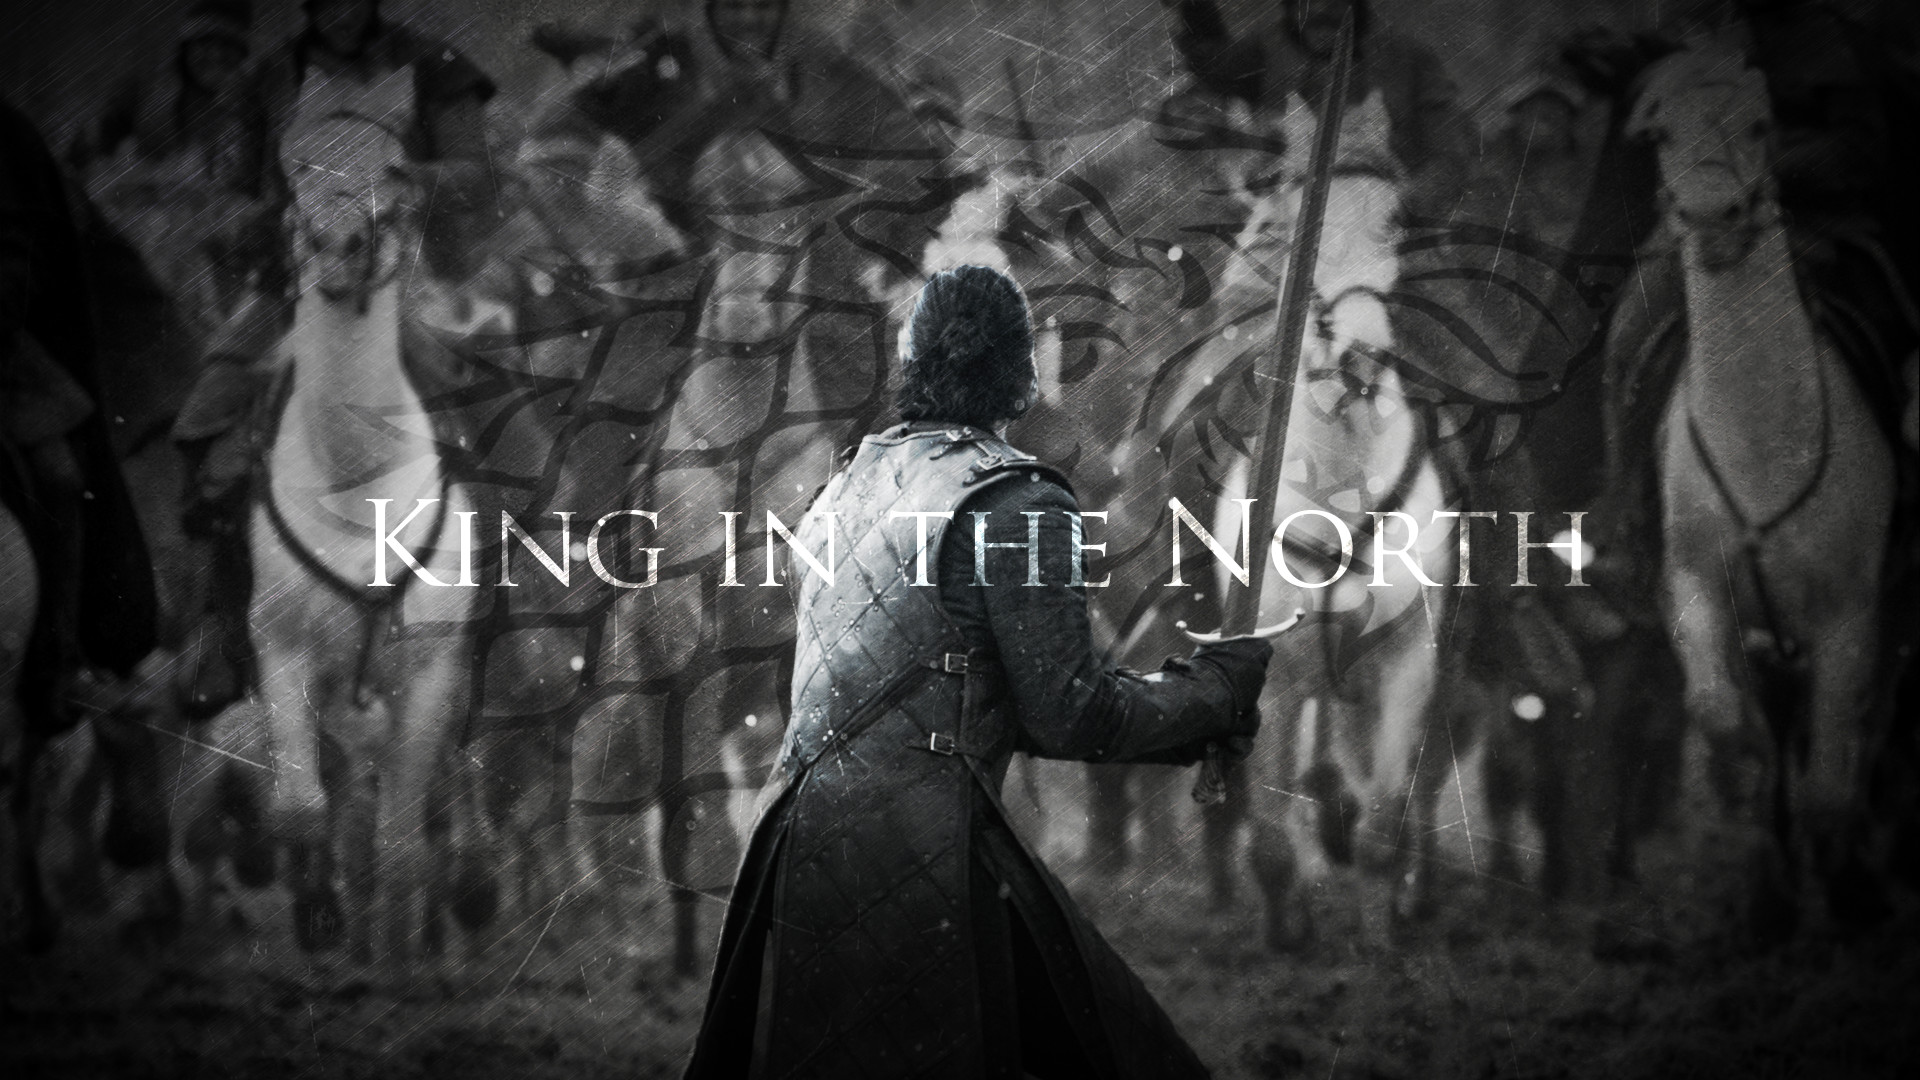 1920x1080 ... King in the North | Jon Snow | Game of Thrones by TaigaLife